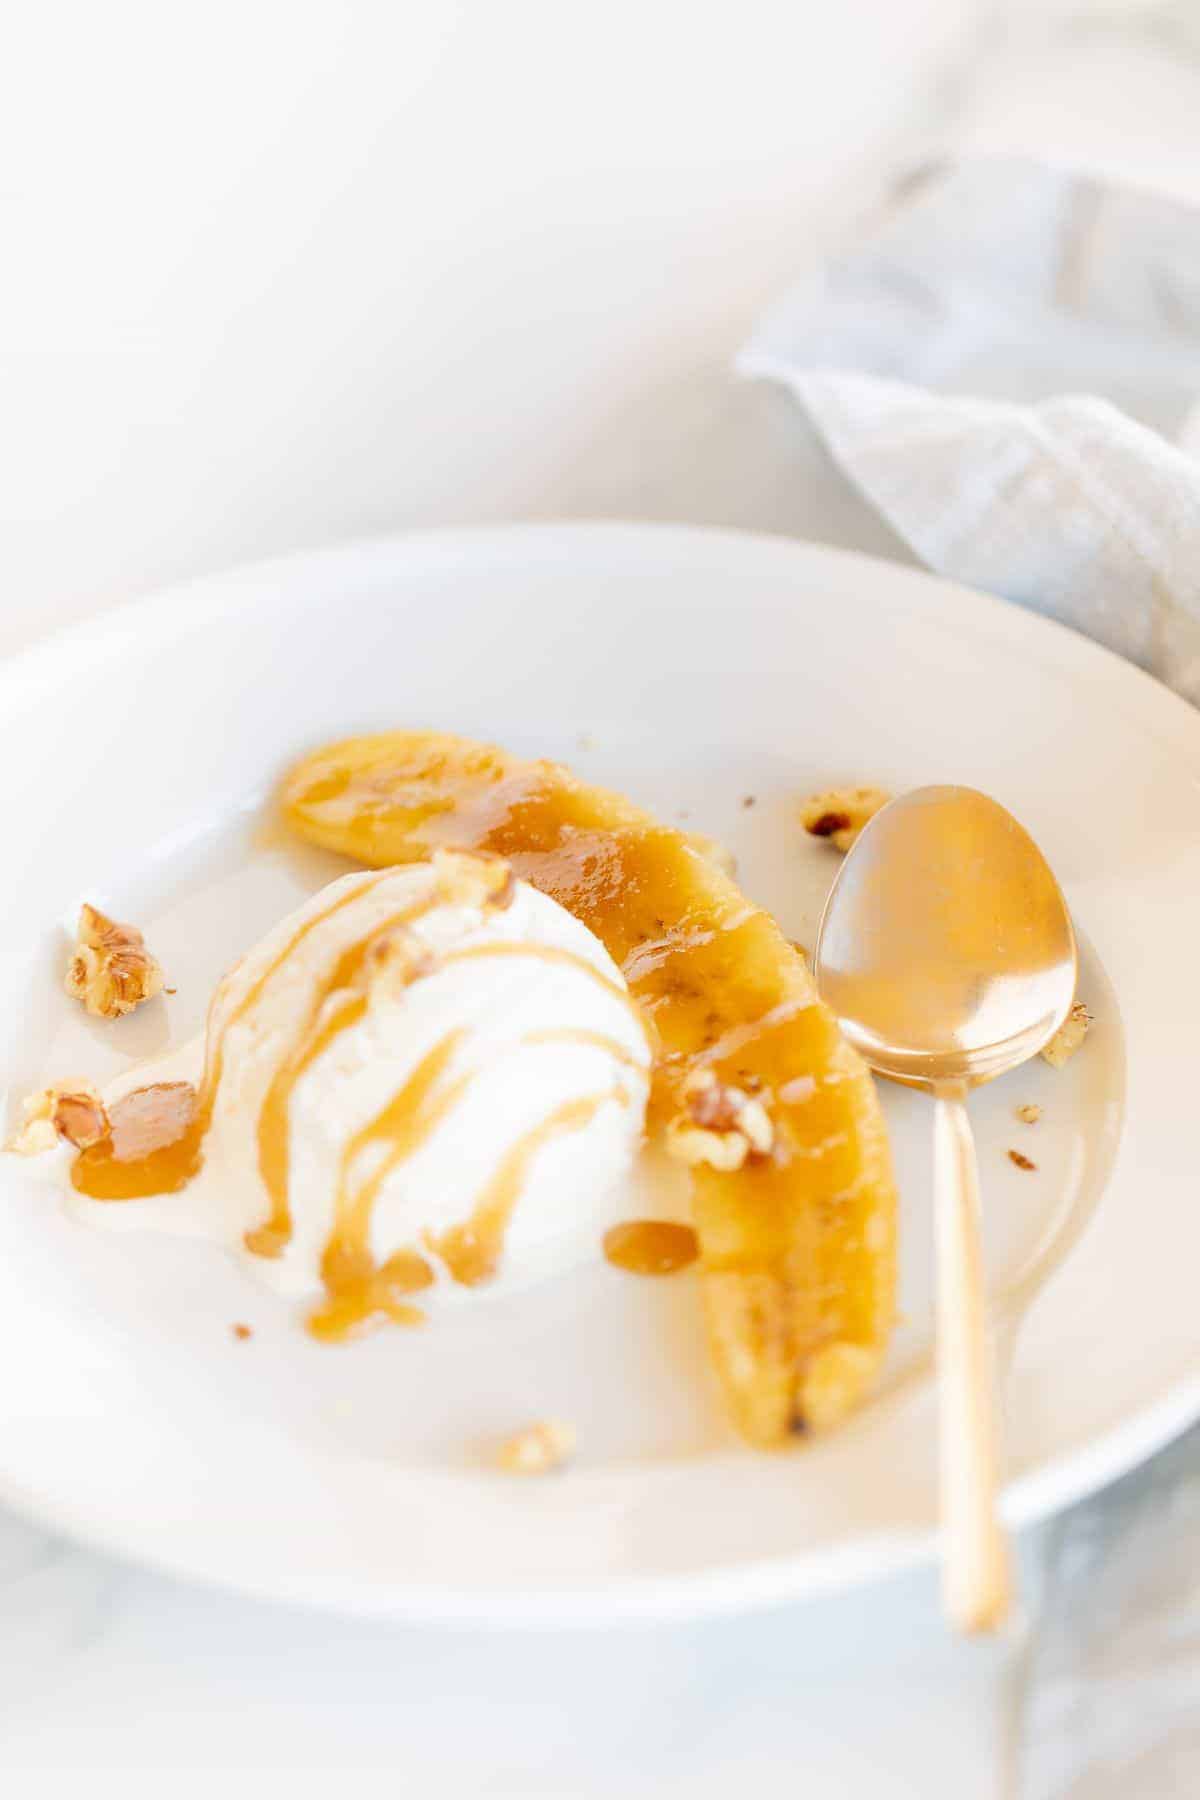 A serving of bananas foster on a white plate, drizzled with caramel sauce and nuts.